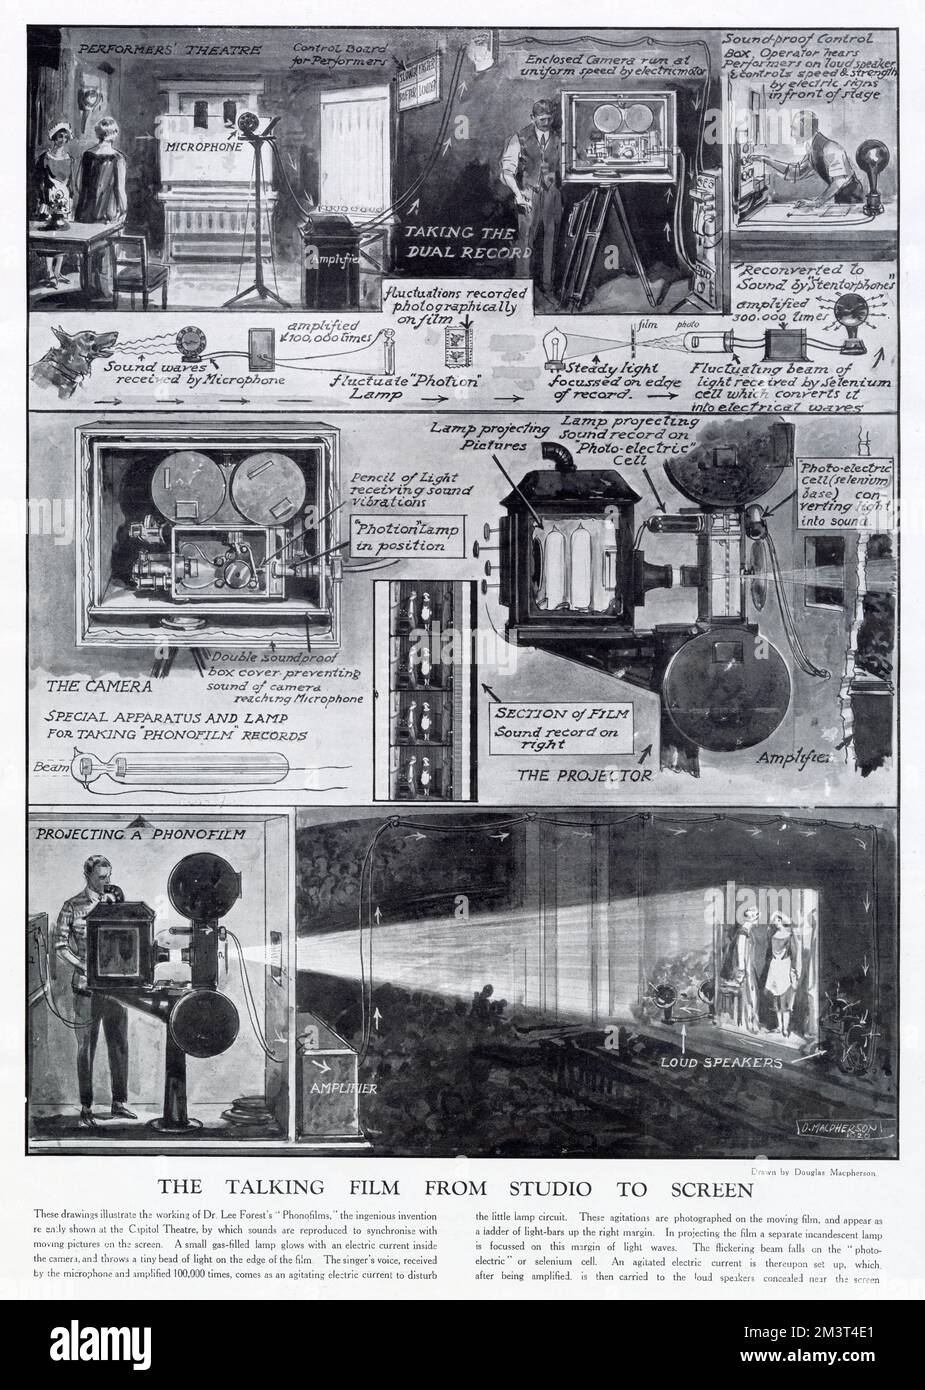 Diagram or infographic by Douglas Macpherson showing the working of Dr. Lee Forest's 'Phonofilms', by which sounds were reproduced to synchronise with moving pictures on the screen, ushering the advent of 'talkies'. Stock Photo